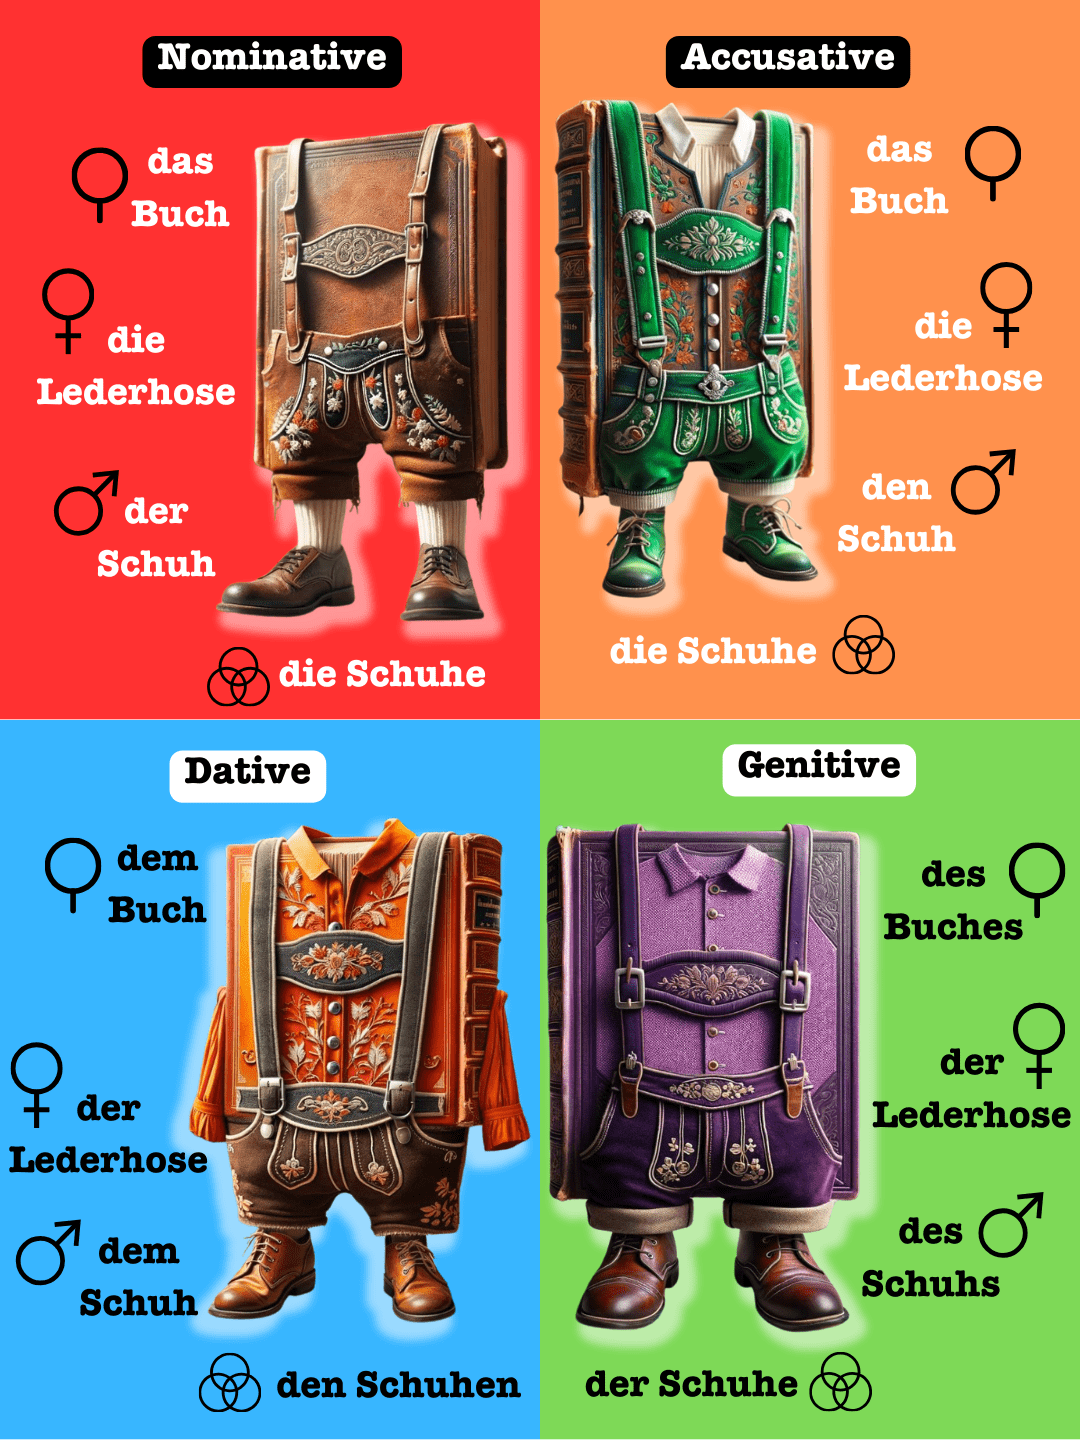 Infographic depicting the four German cases as different colors of Lederhose worn by a book, with gender symbols for masculine, feminine, neuter and plural.